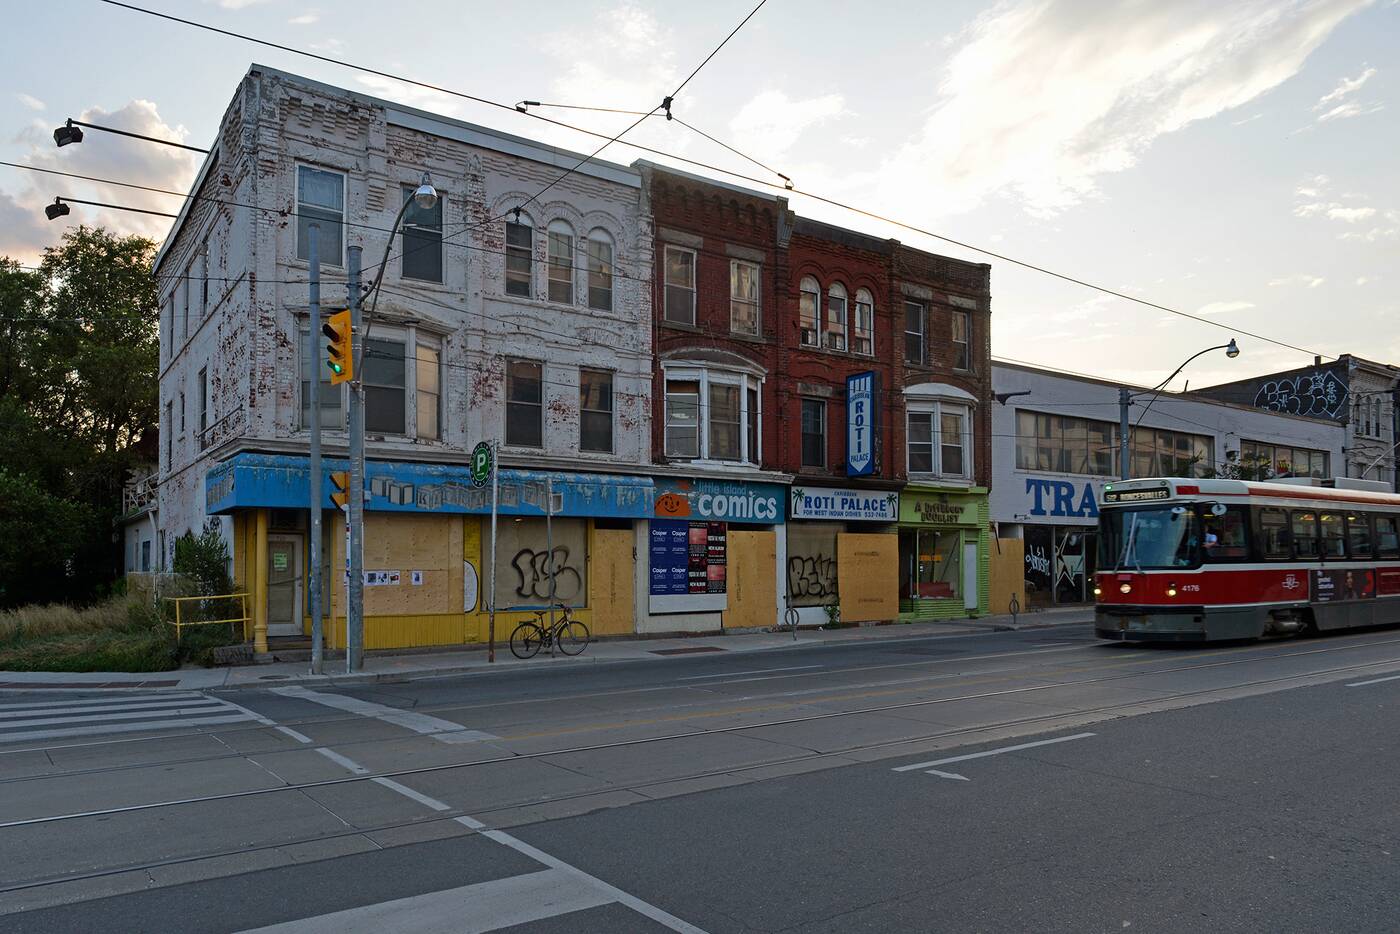 Mirvish Village has been completely shelled out